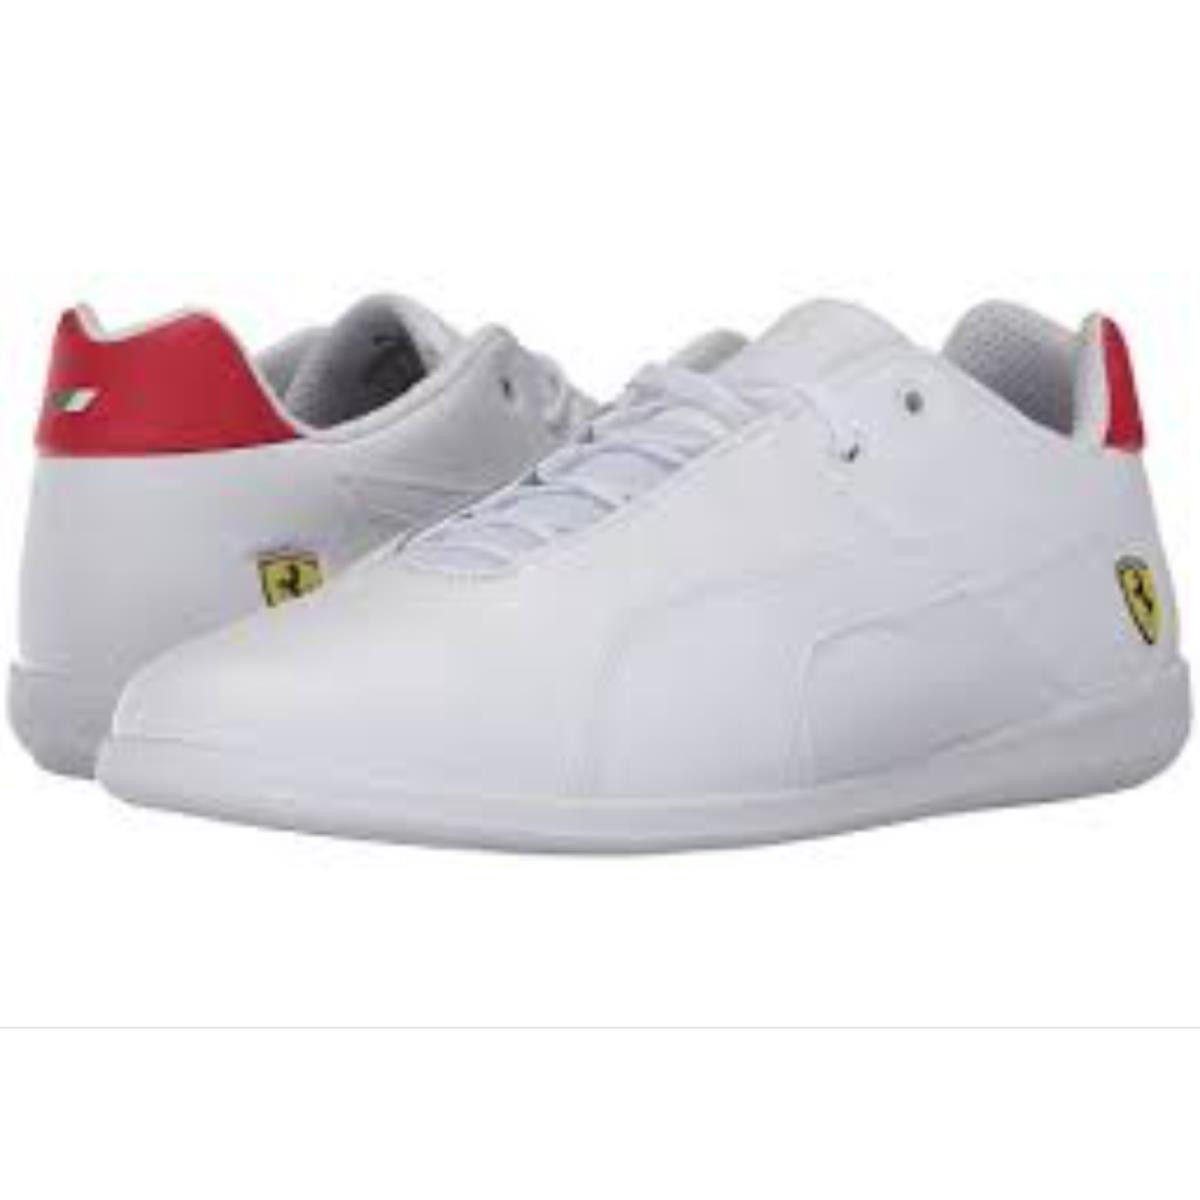 Puma Ferrari Men`s Casual Sneakers Lace-up Athletic Shoes White Leather Size 13